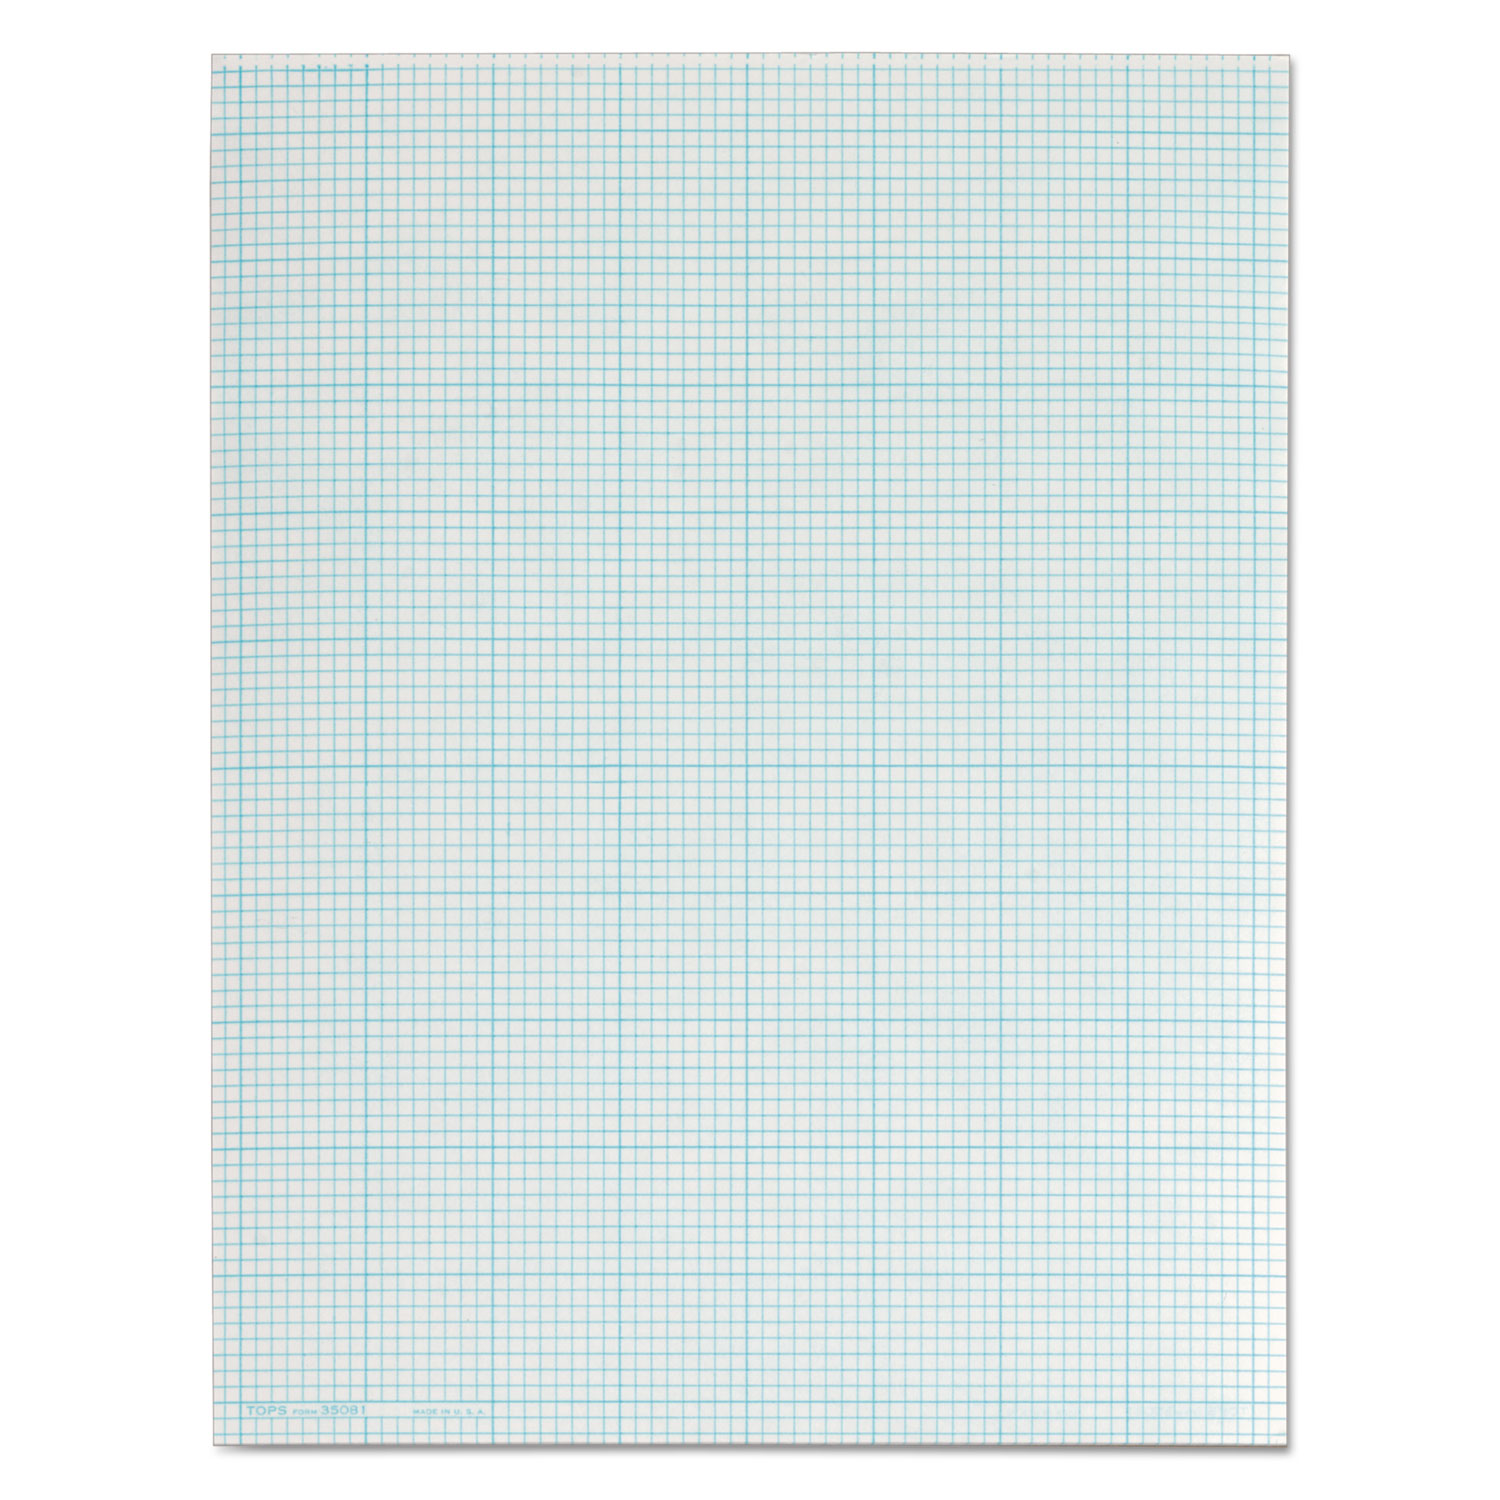  TOPS 35081 Cross Section Pads, 8 sq/in Quadrille Rule, 8.5 x 11, White, 50 Sheets (TOP35081) 